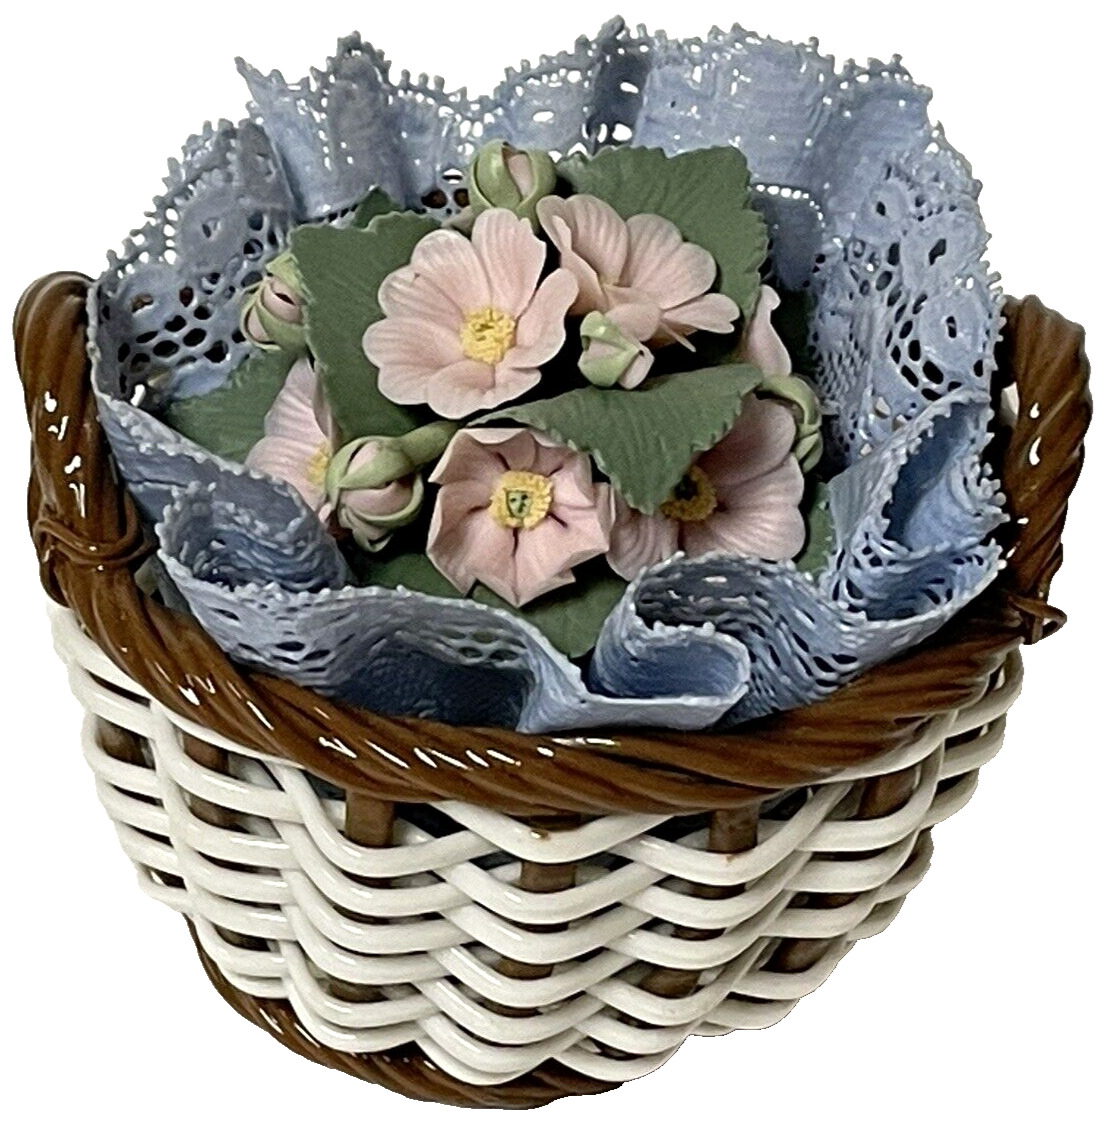 Lladro 1554 Capricho Small Flower Basket Porcelain Figurine - Chipped Lace